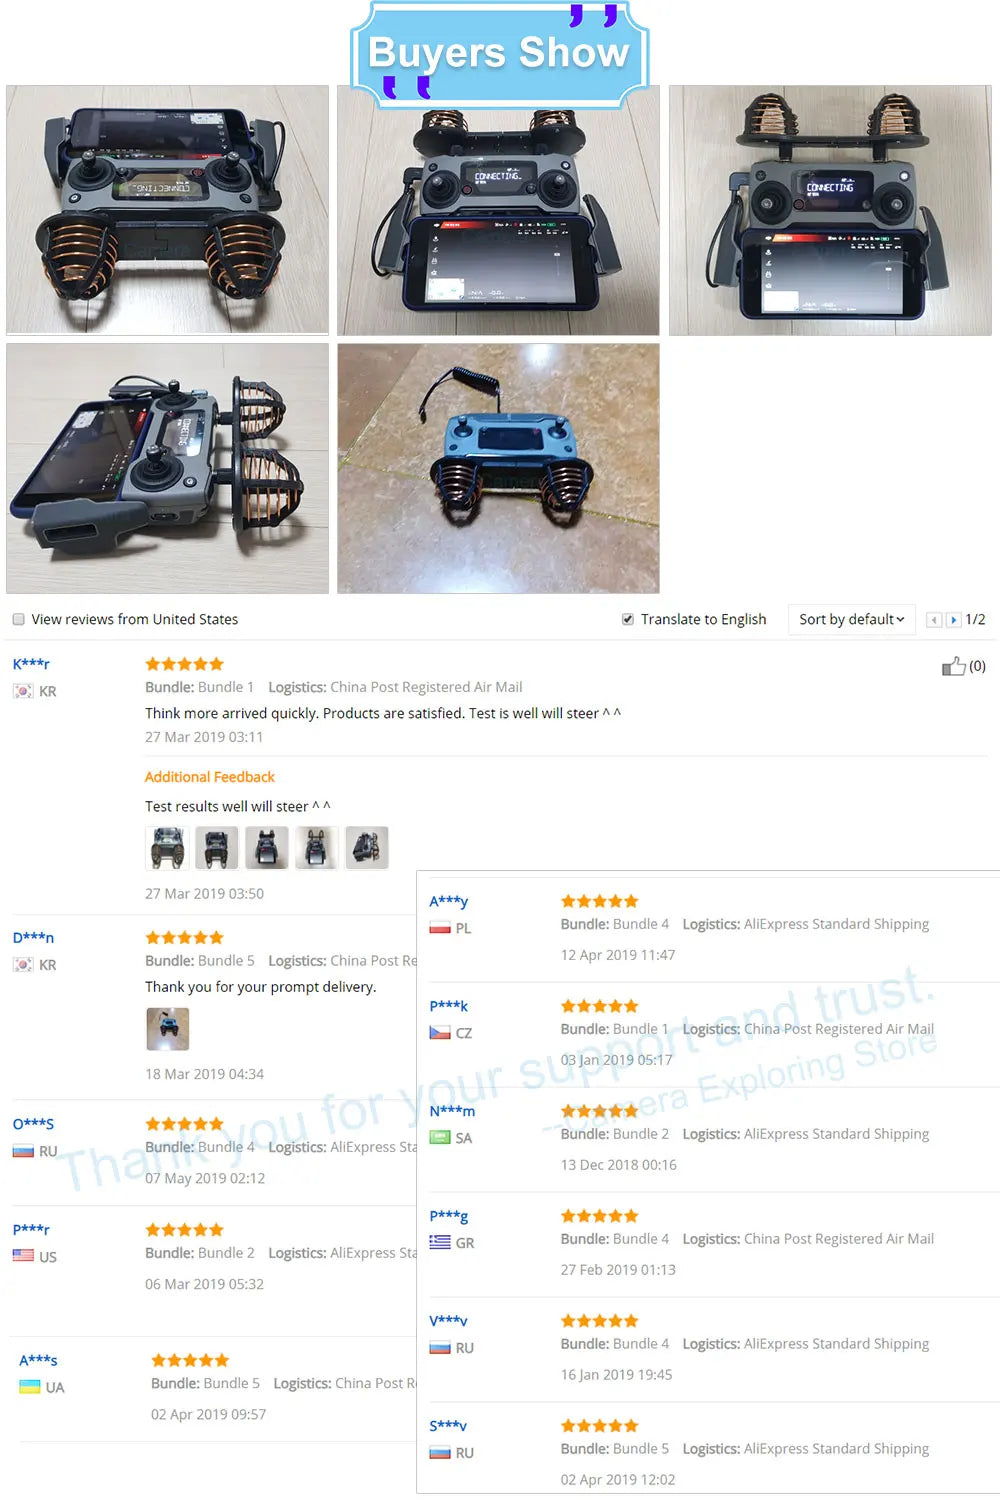 Remote Control Antenna, 9 Buyers Show 0uj37 View reviews from United States .